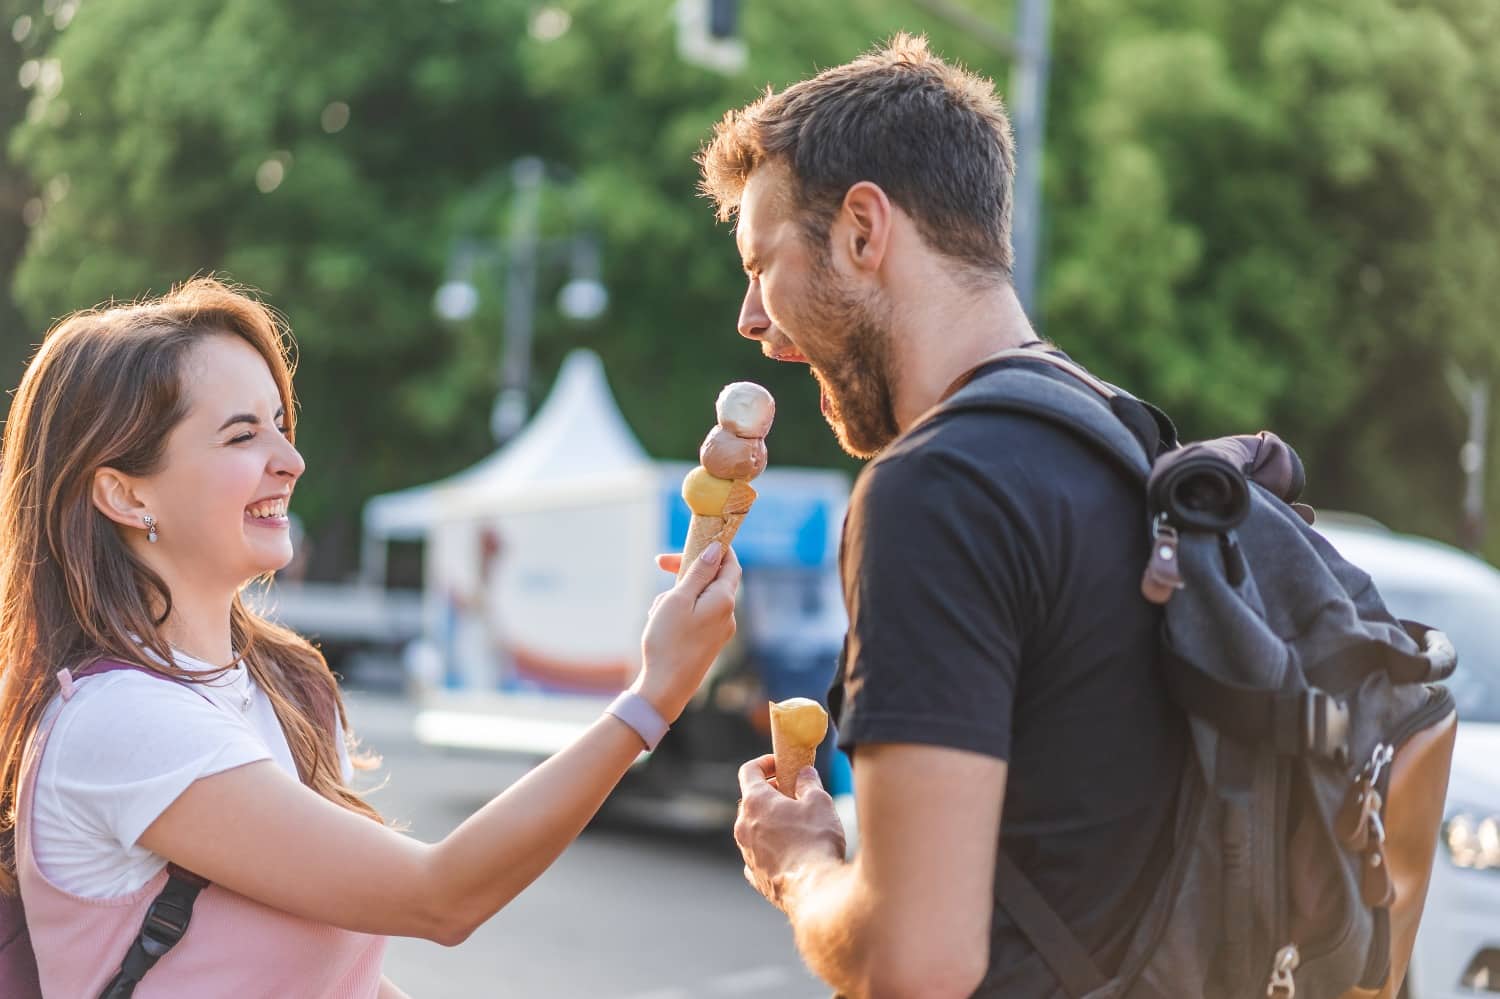 young woman feeding ice cream cone to young man